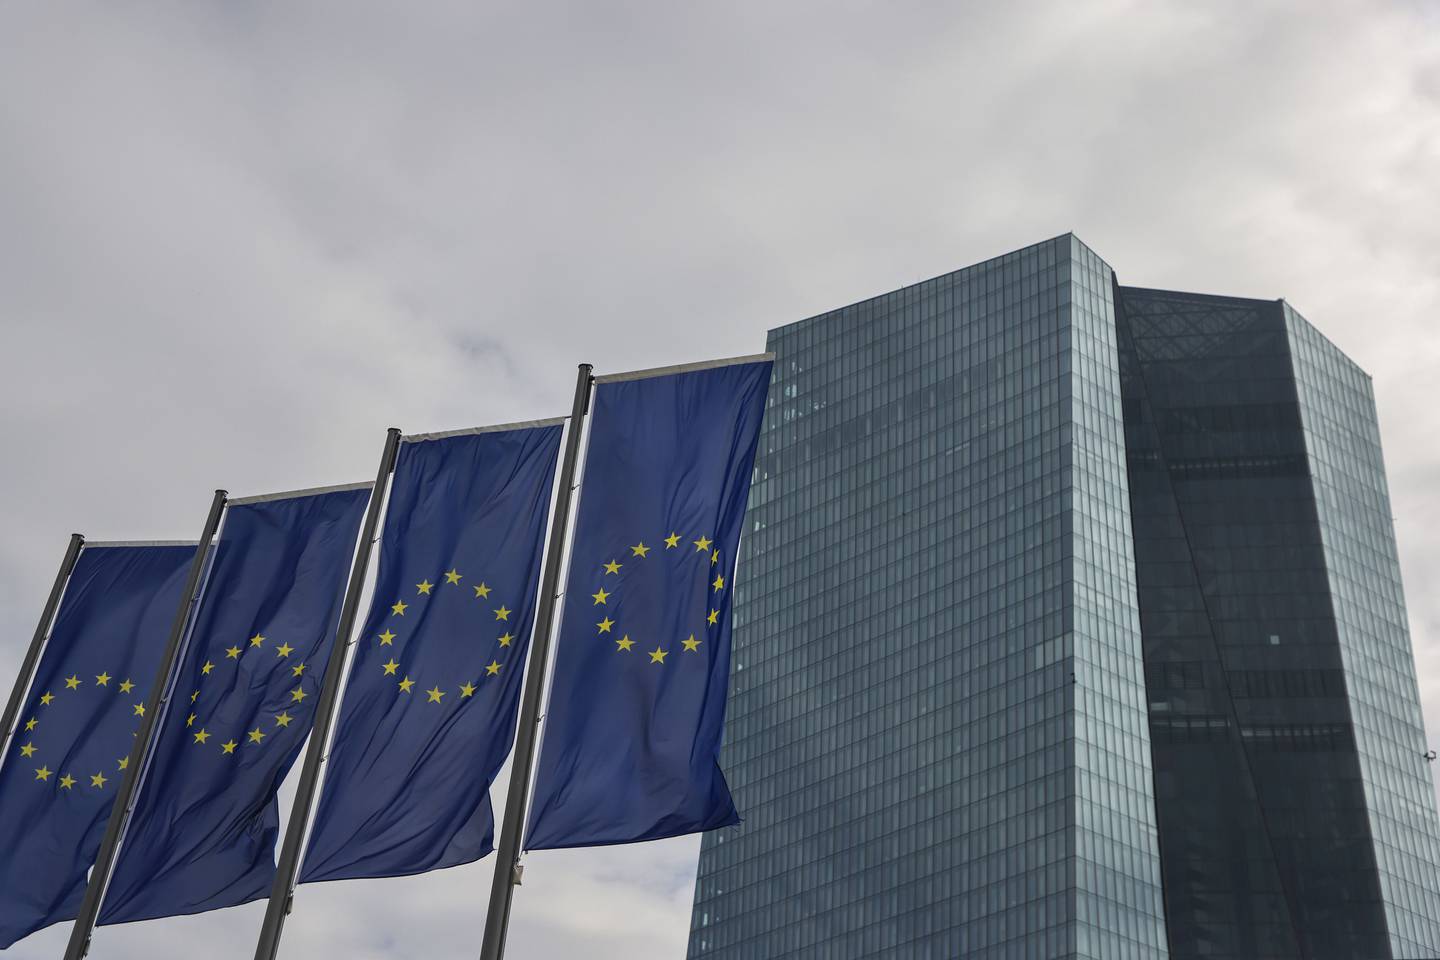 European Union flags outside the headquarters of the European Central Bank (ECB) in Frankfurt, Germany, on Thursday.